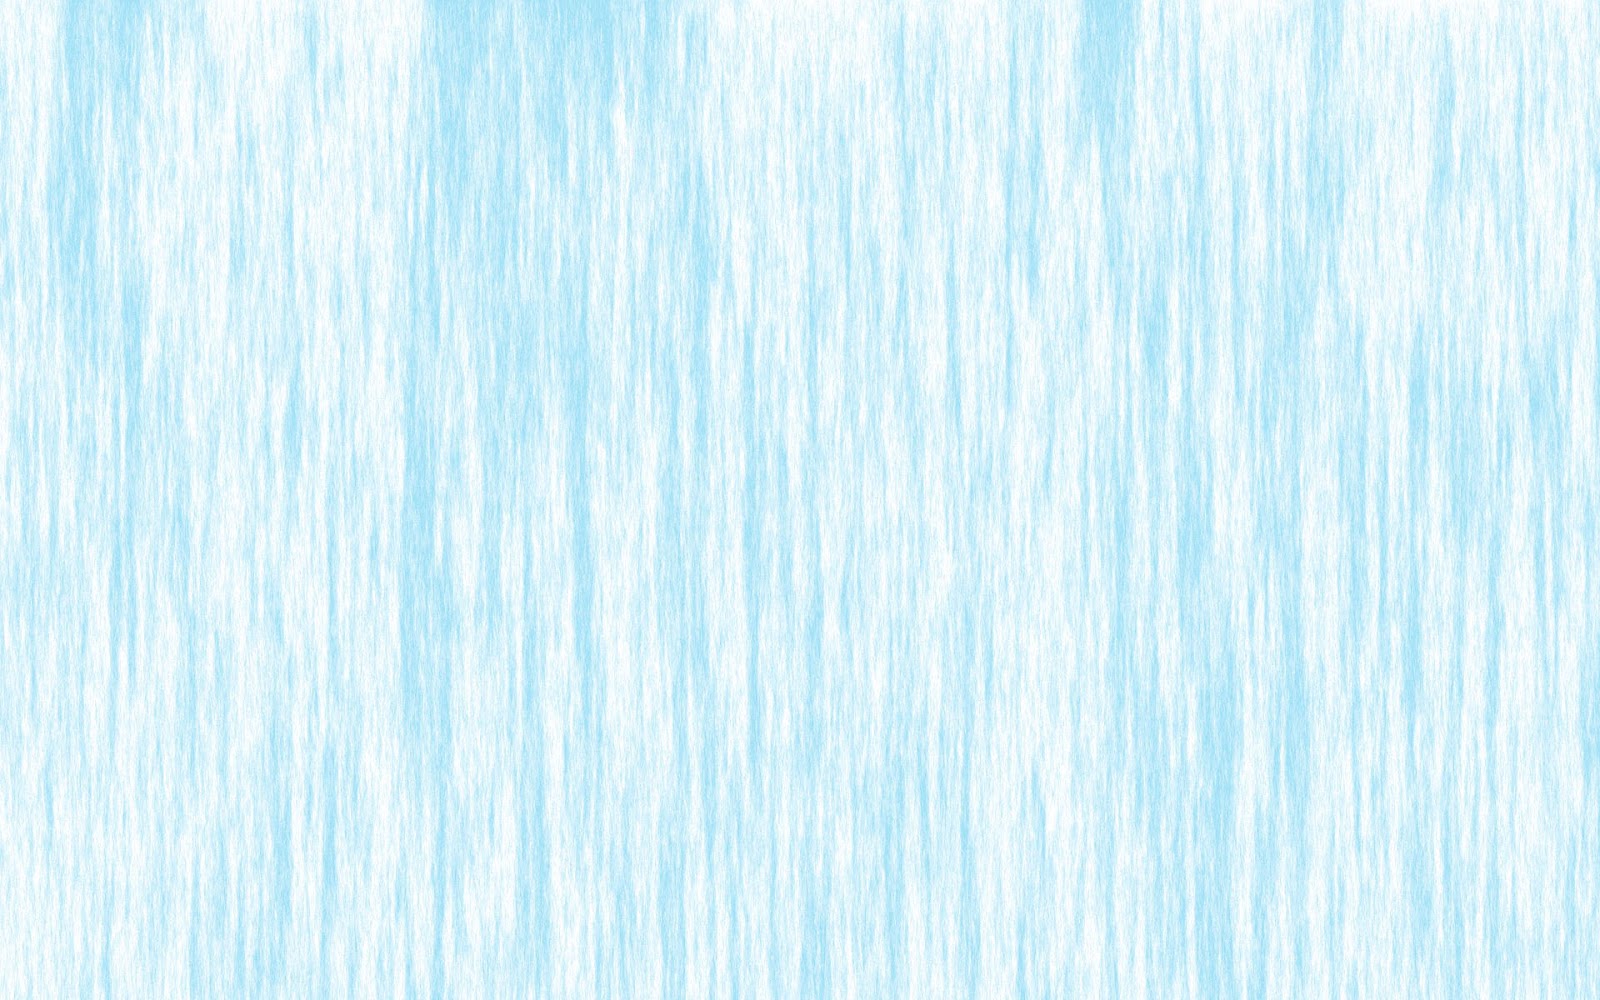 Babyblue Wallpapers